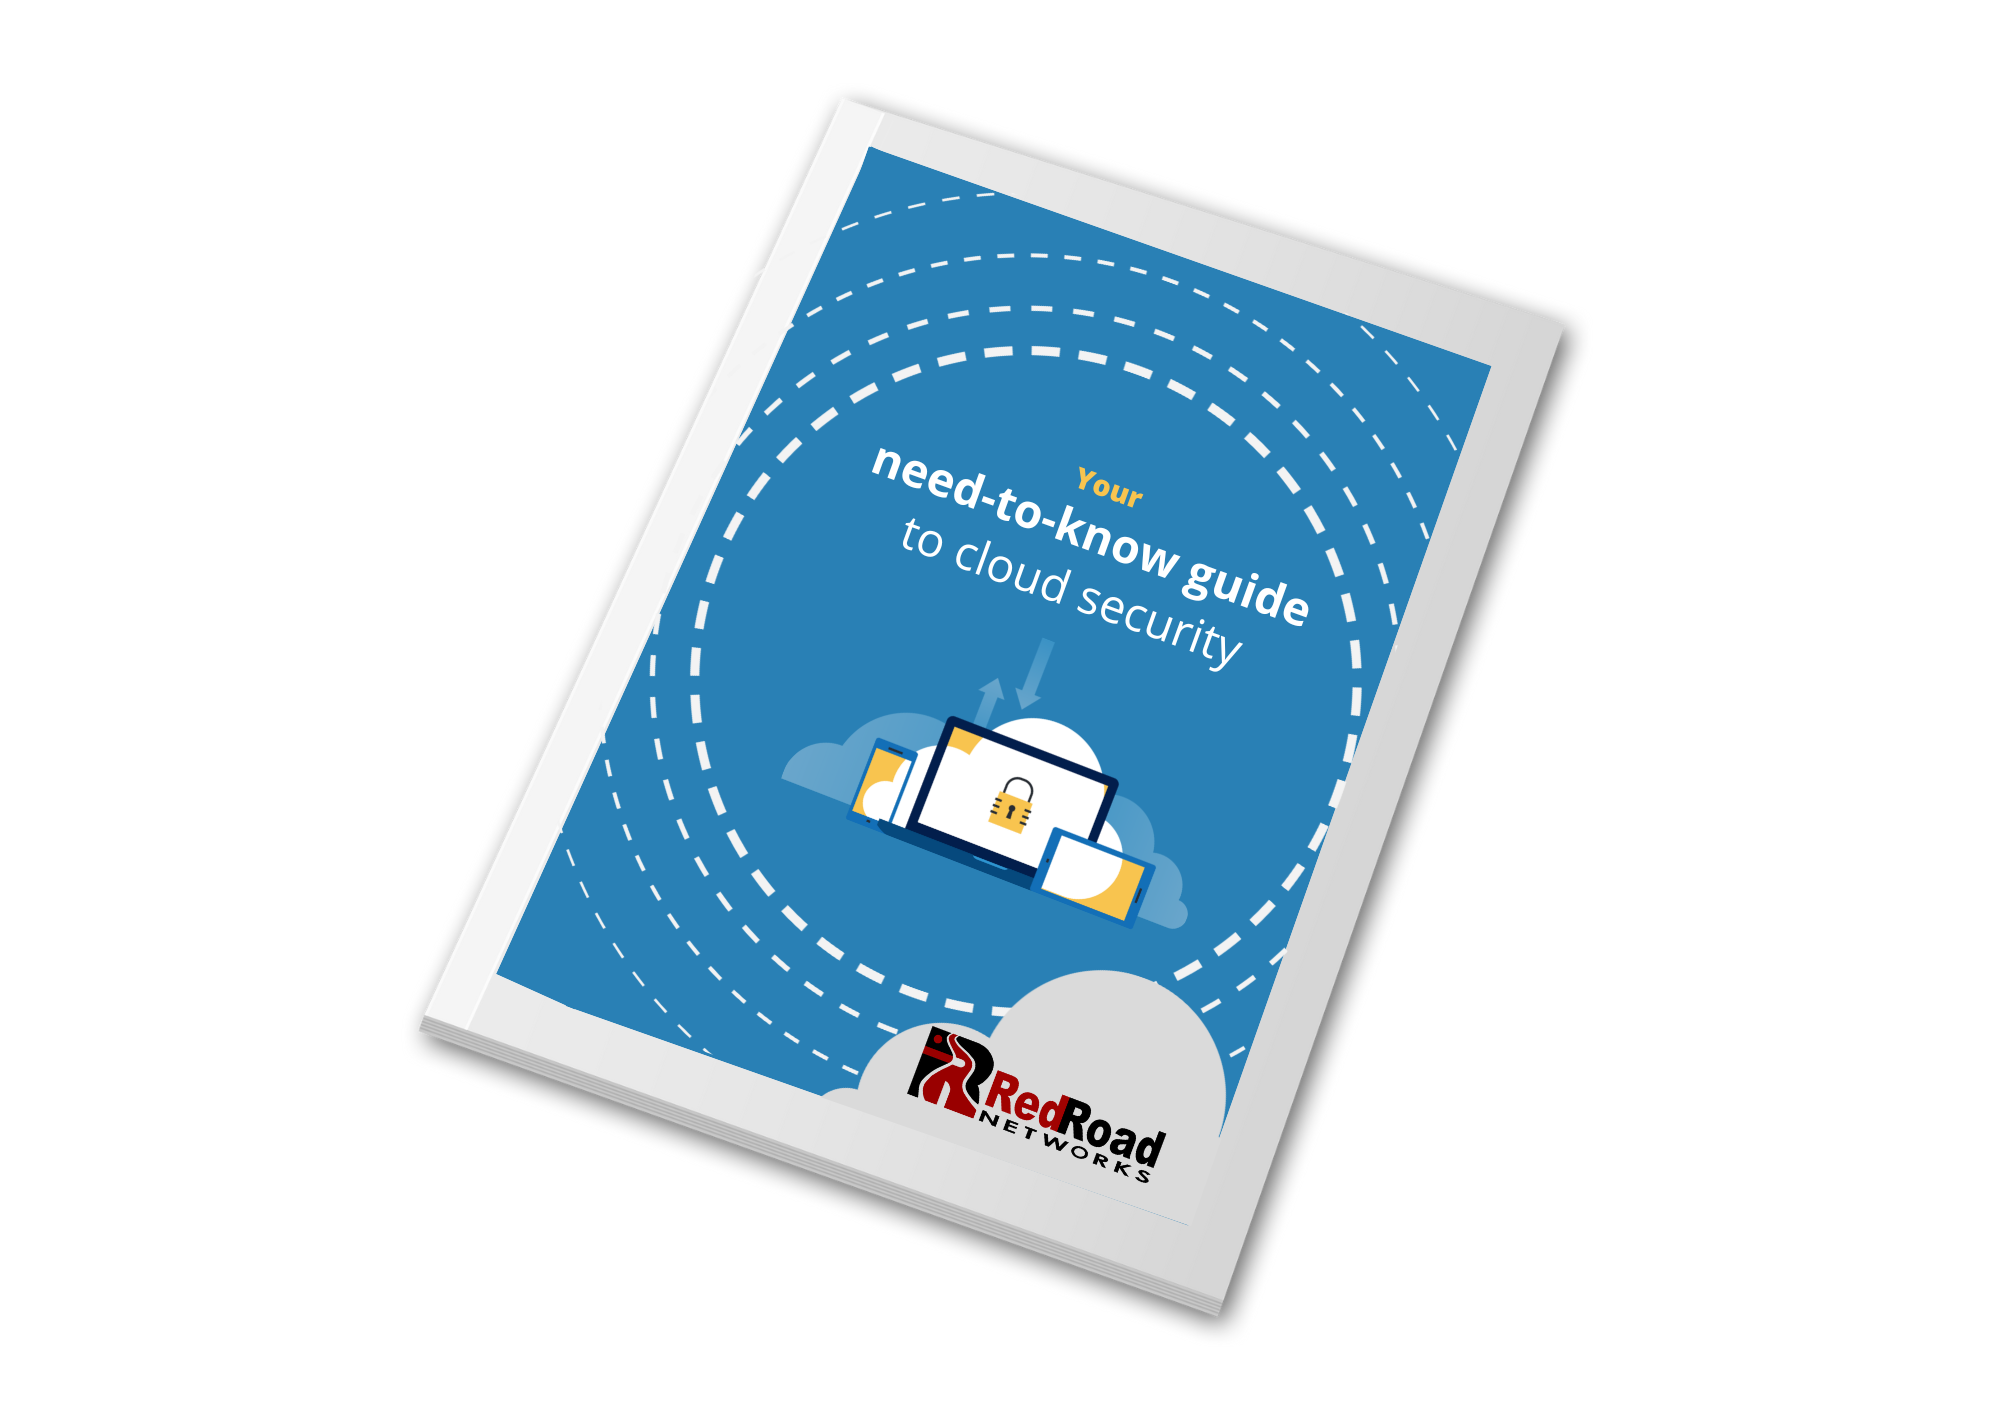 Your need-to-know guide to cloud security